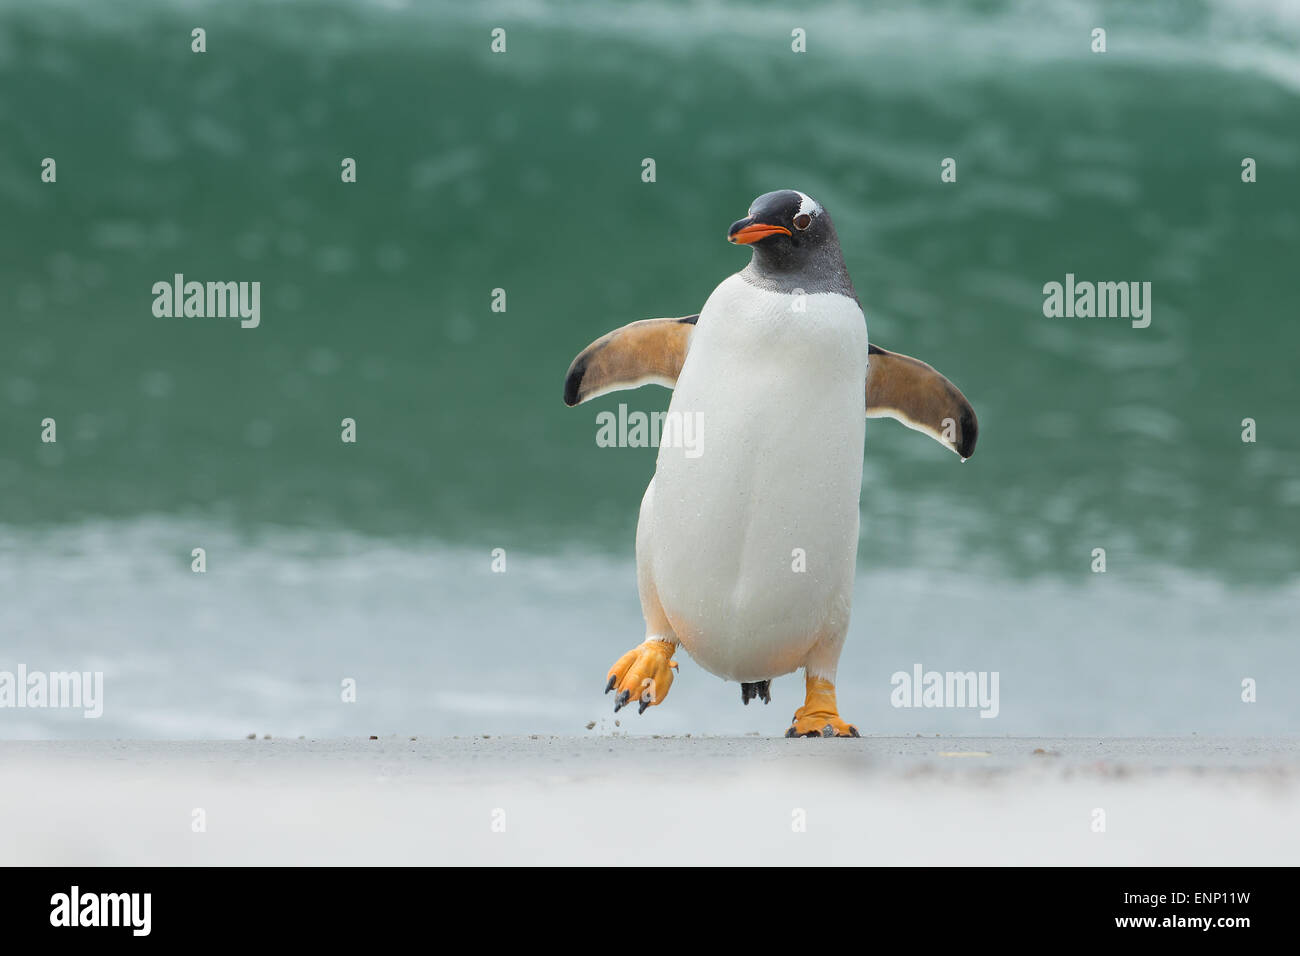 Gentoo penguin running from a stormy ocean Stock Photo